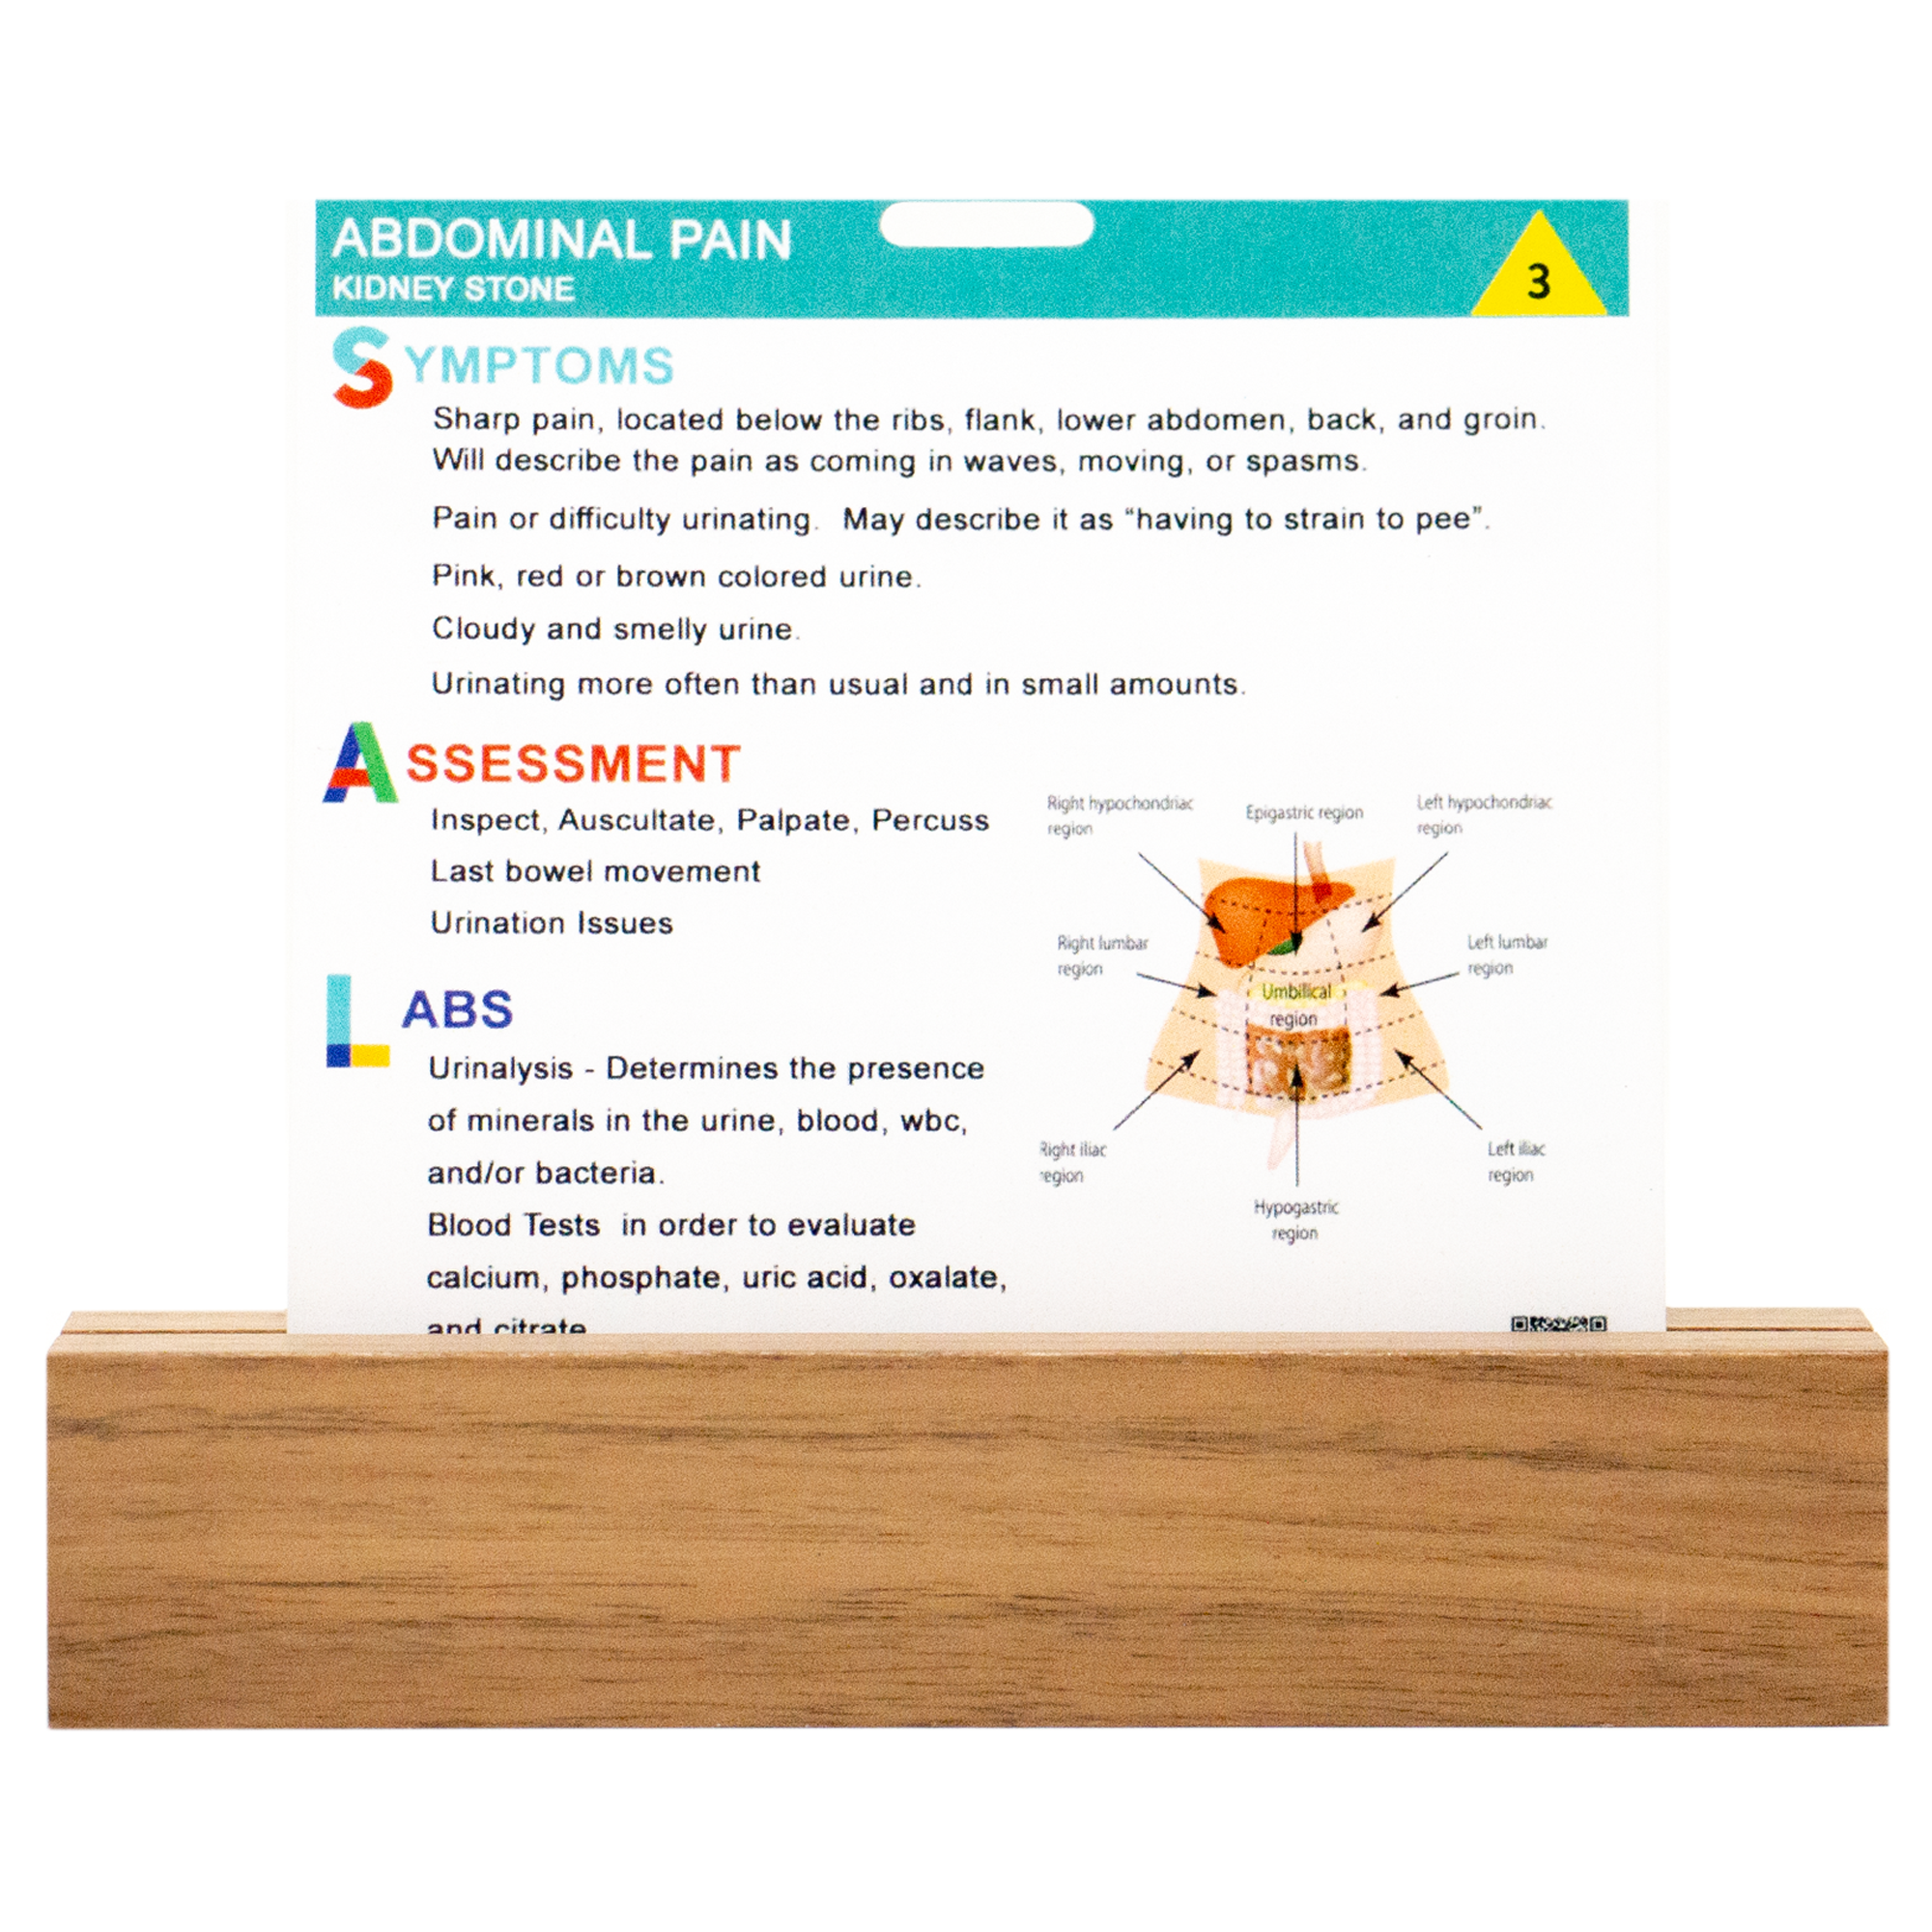 Side one of our kidney stone workup badge buddy contains symptoms, assessment and labs.